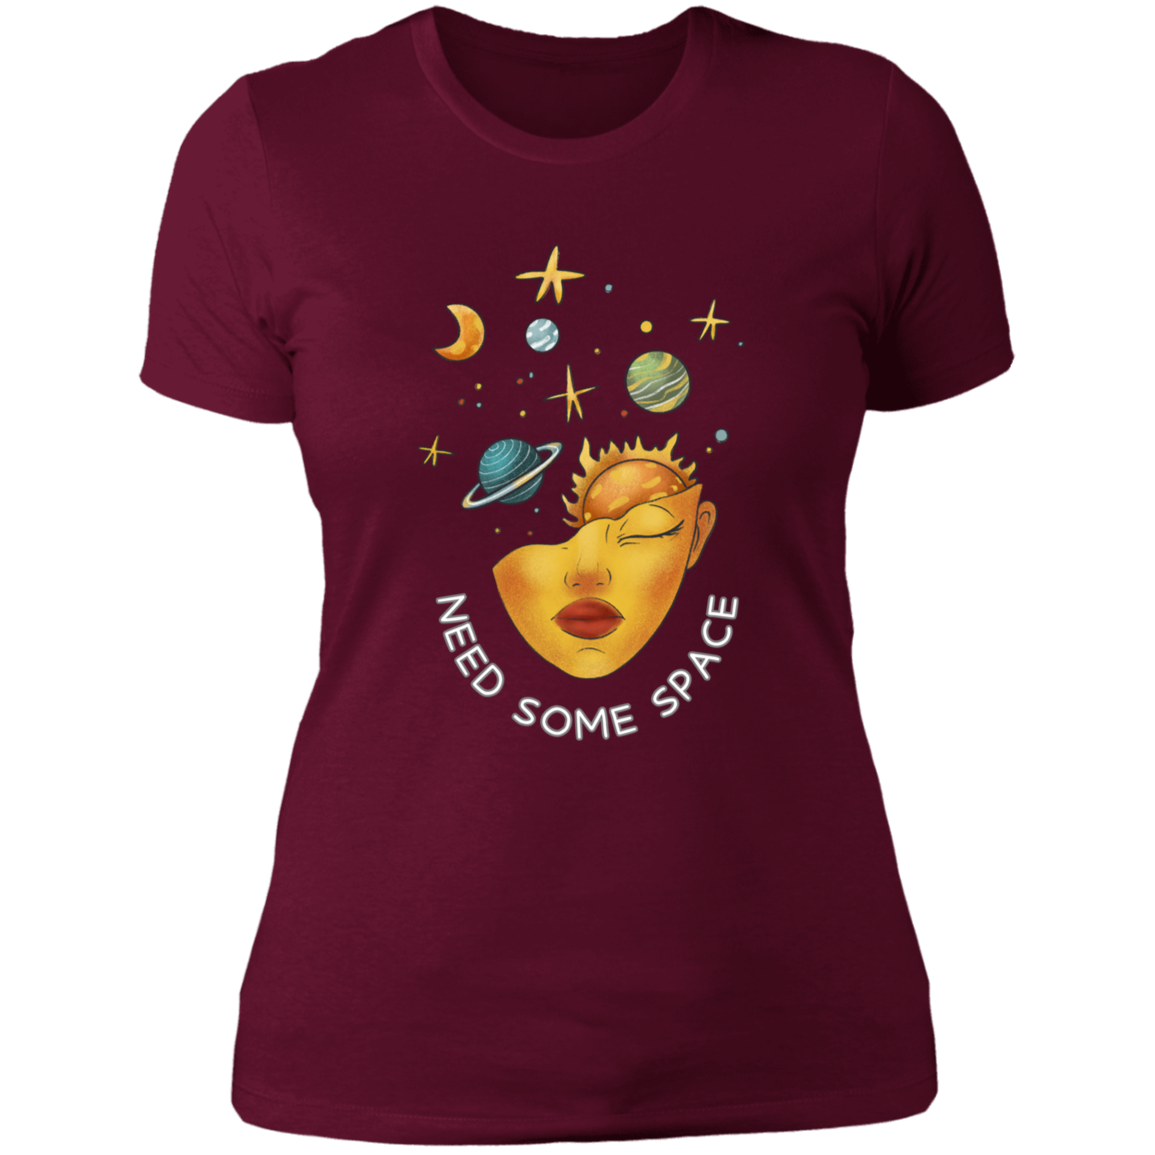 NEED SOME SPACE T-SHIRT